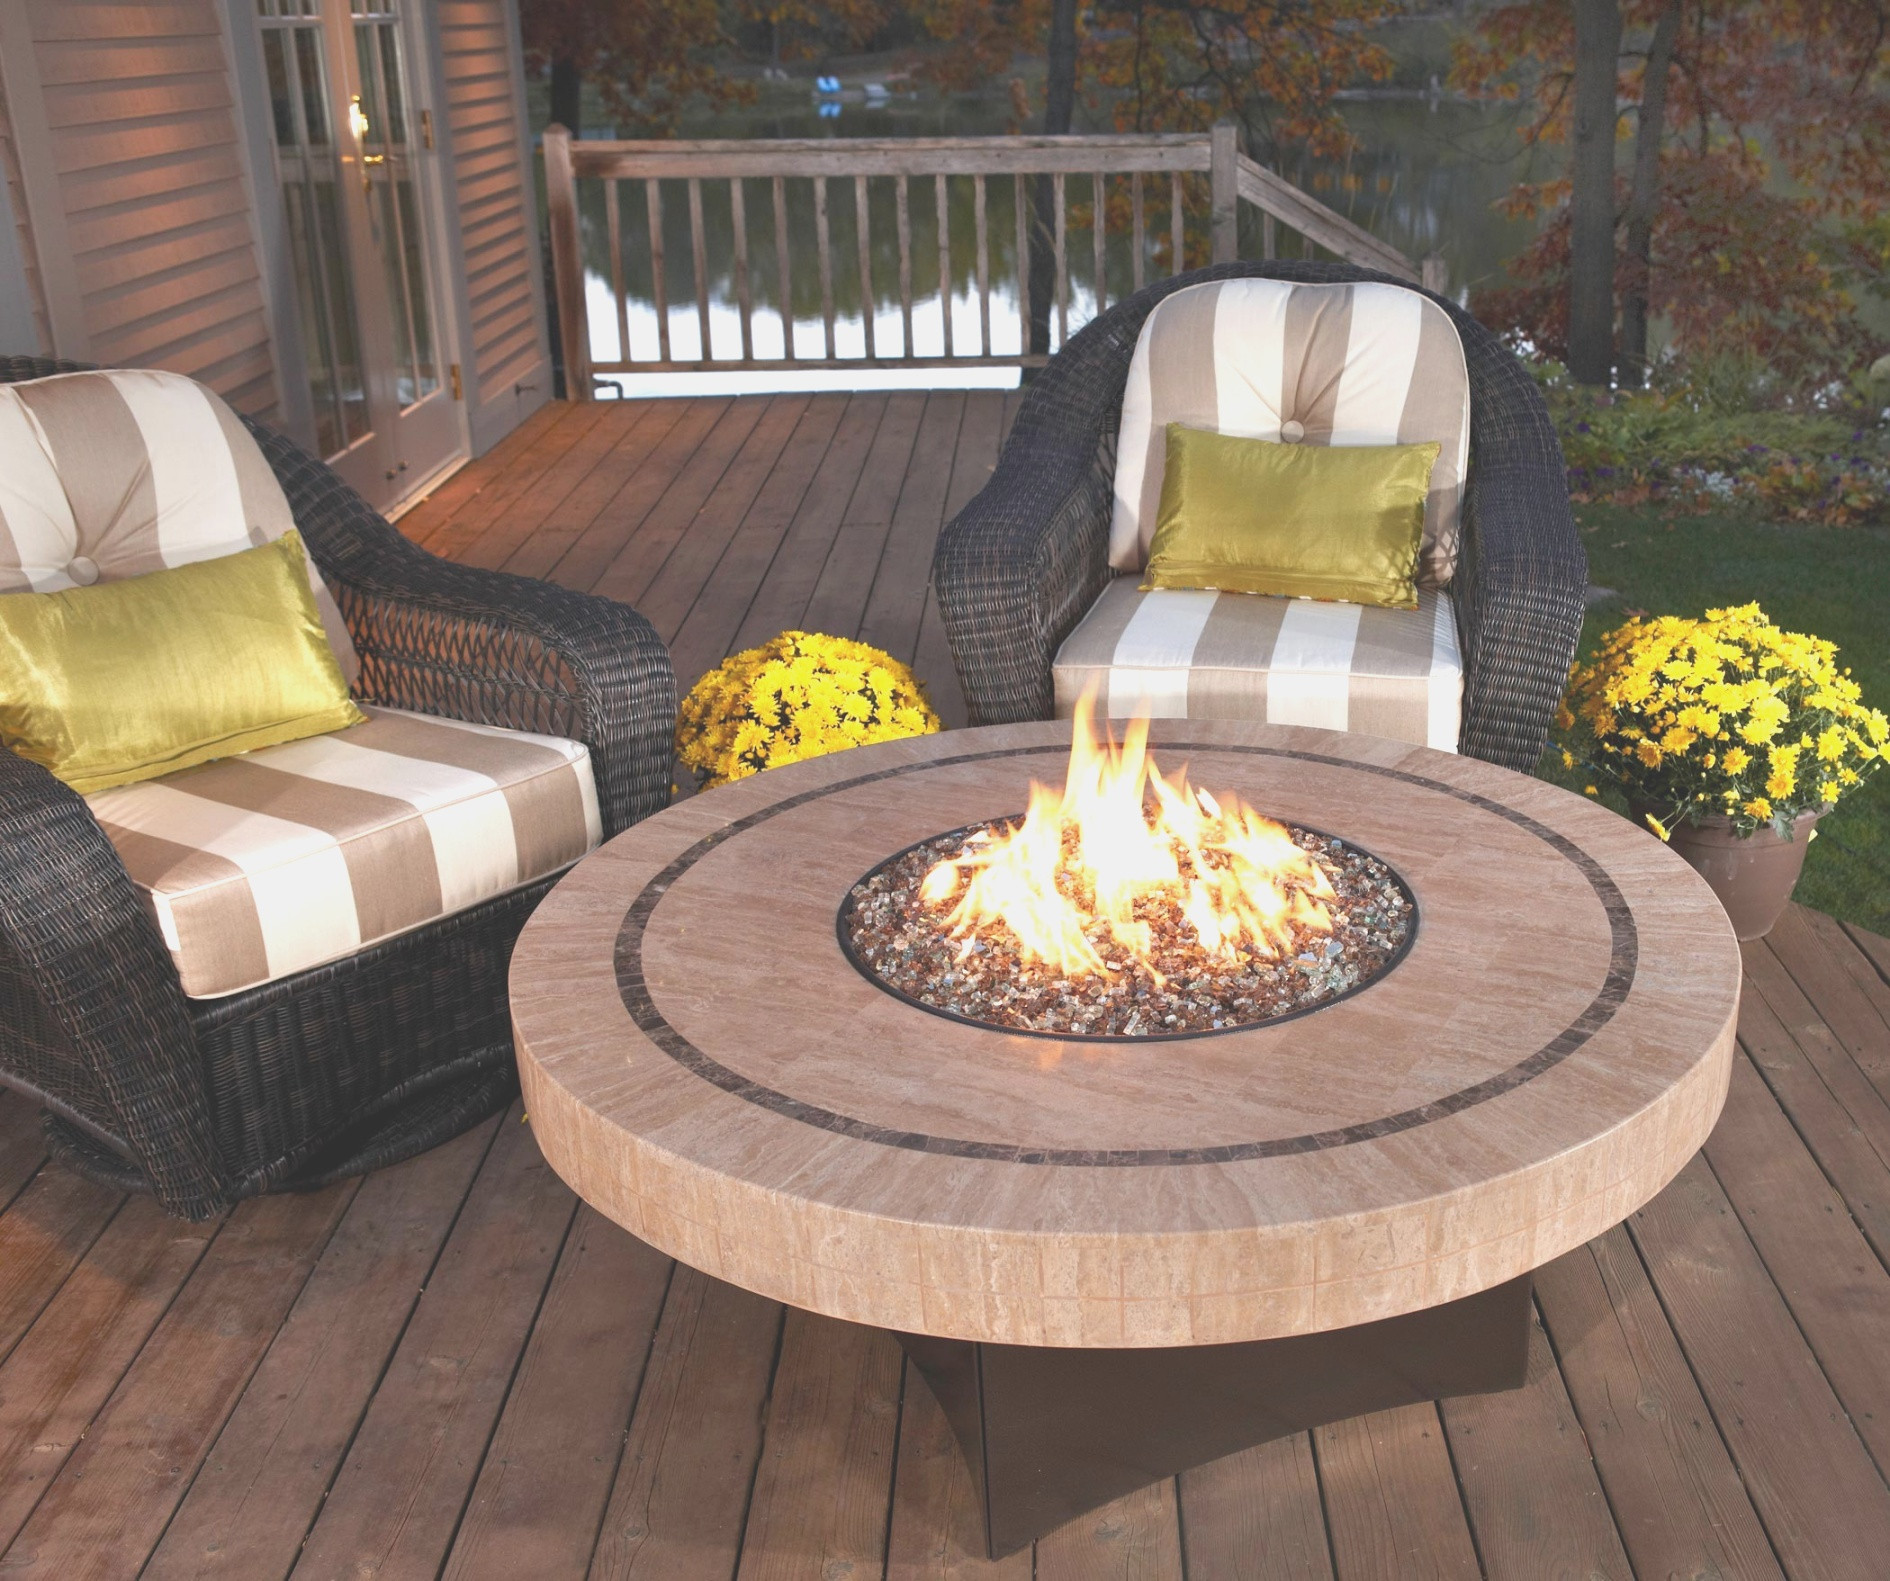 Outdoor Fire Pit Kits
 Reasons Why Outdoor Gas Fire Pit Kits Is